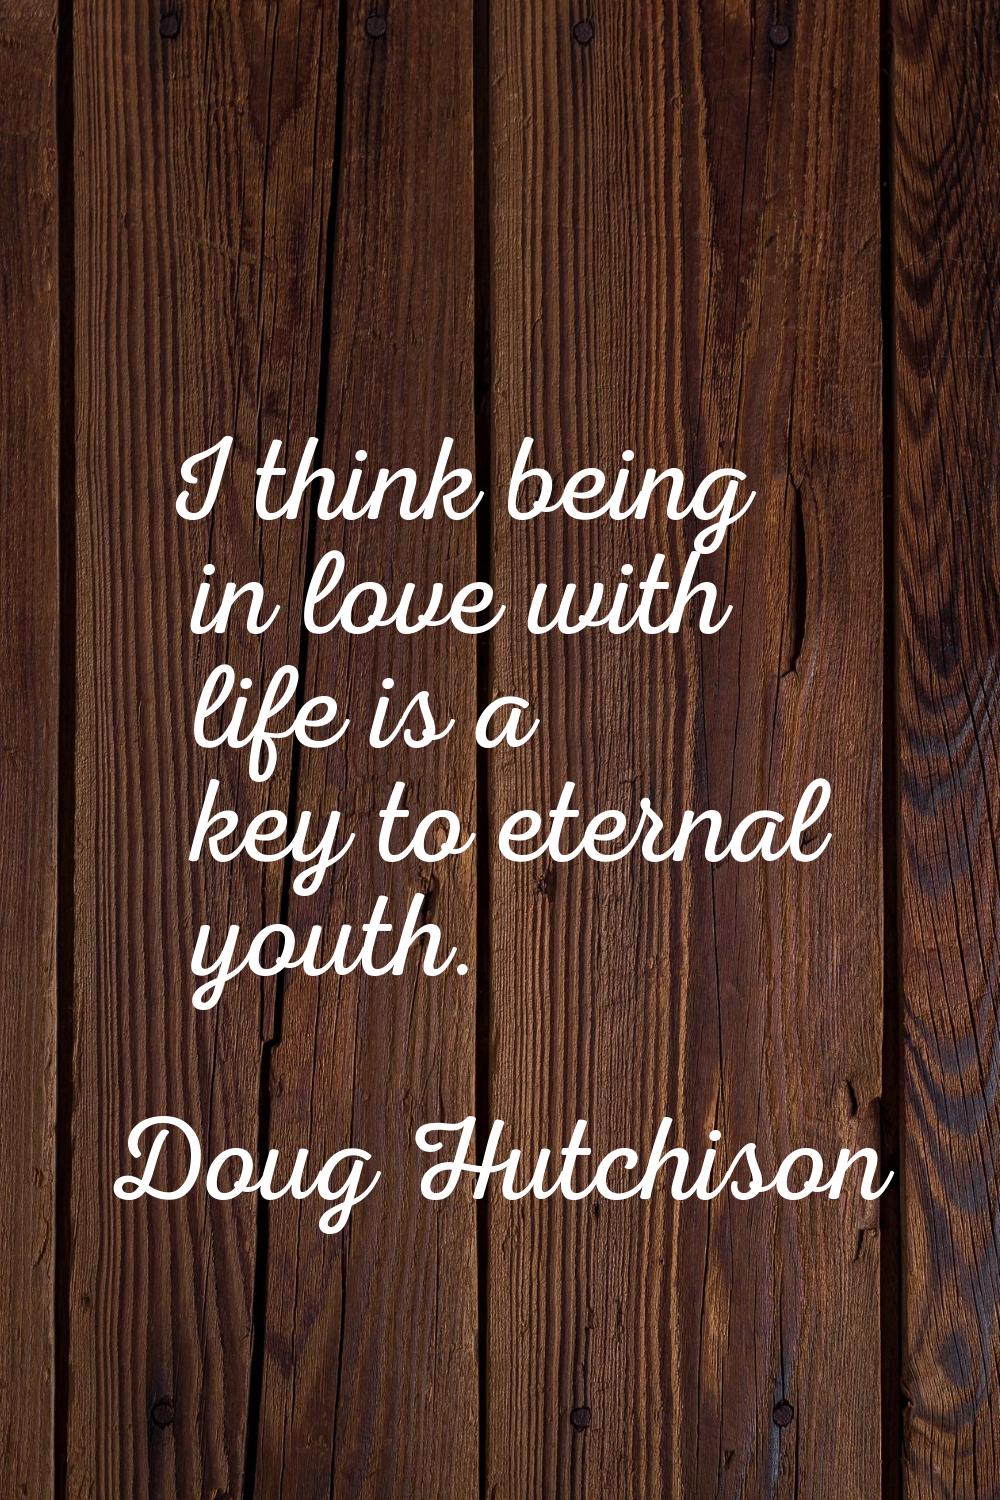 I think being in love with life is a key to eternal youth.